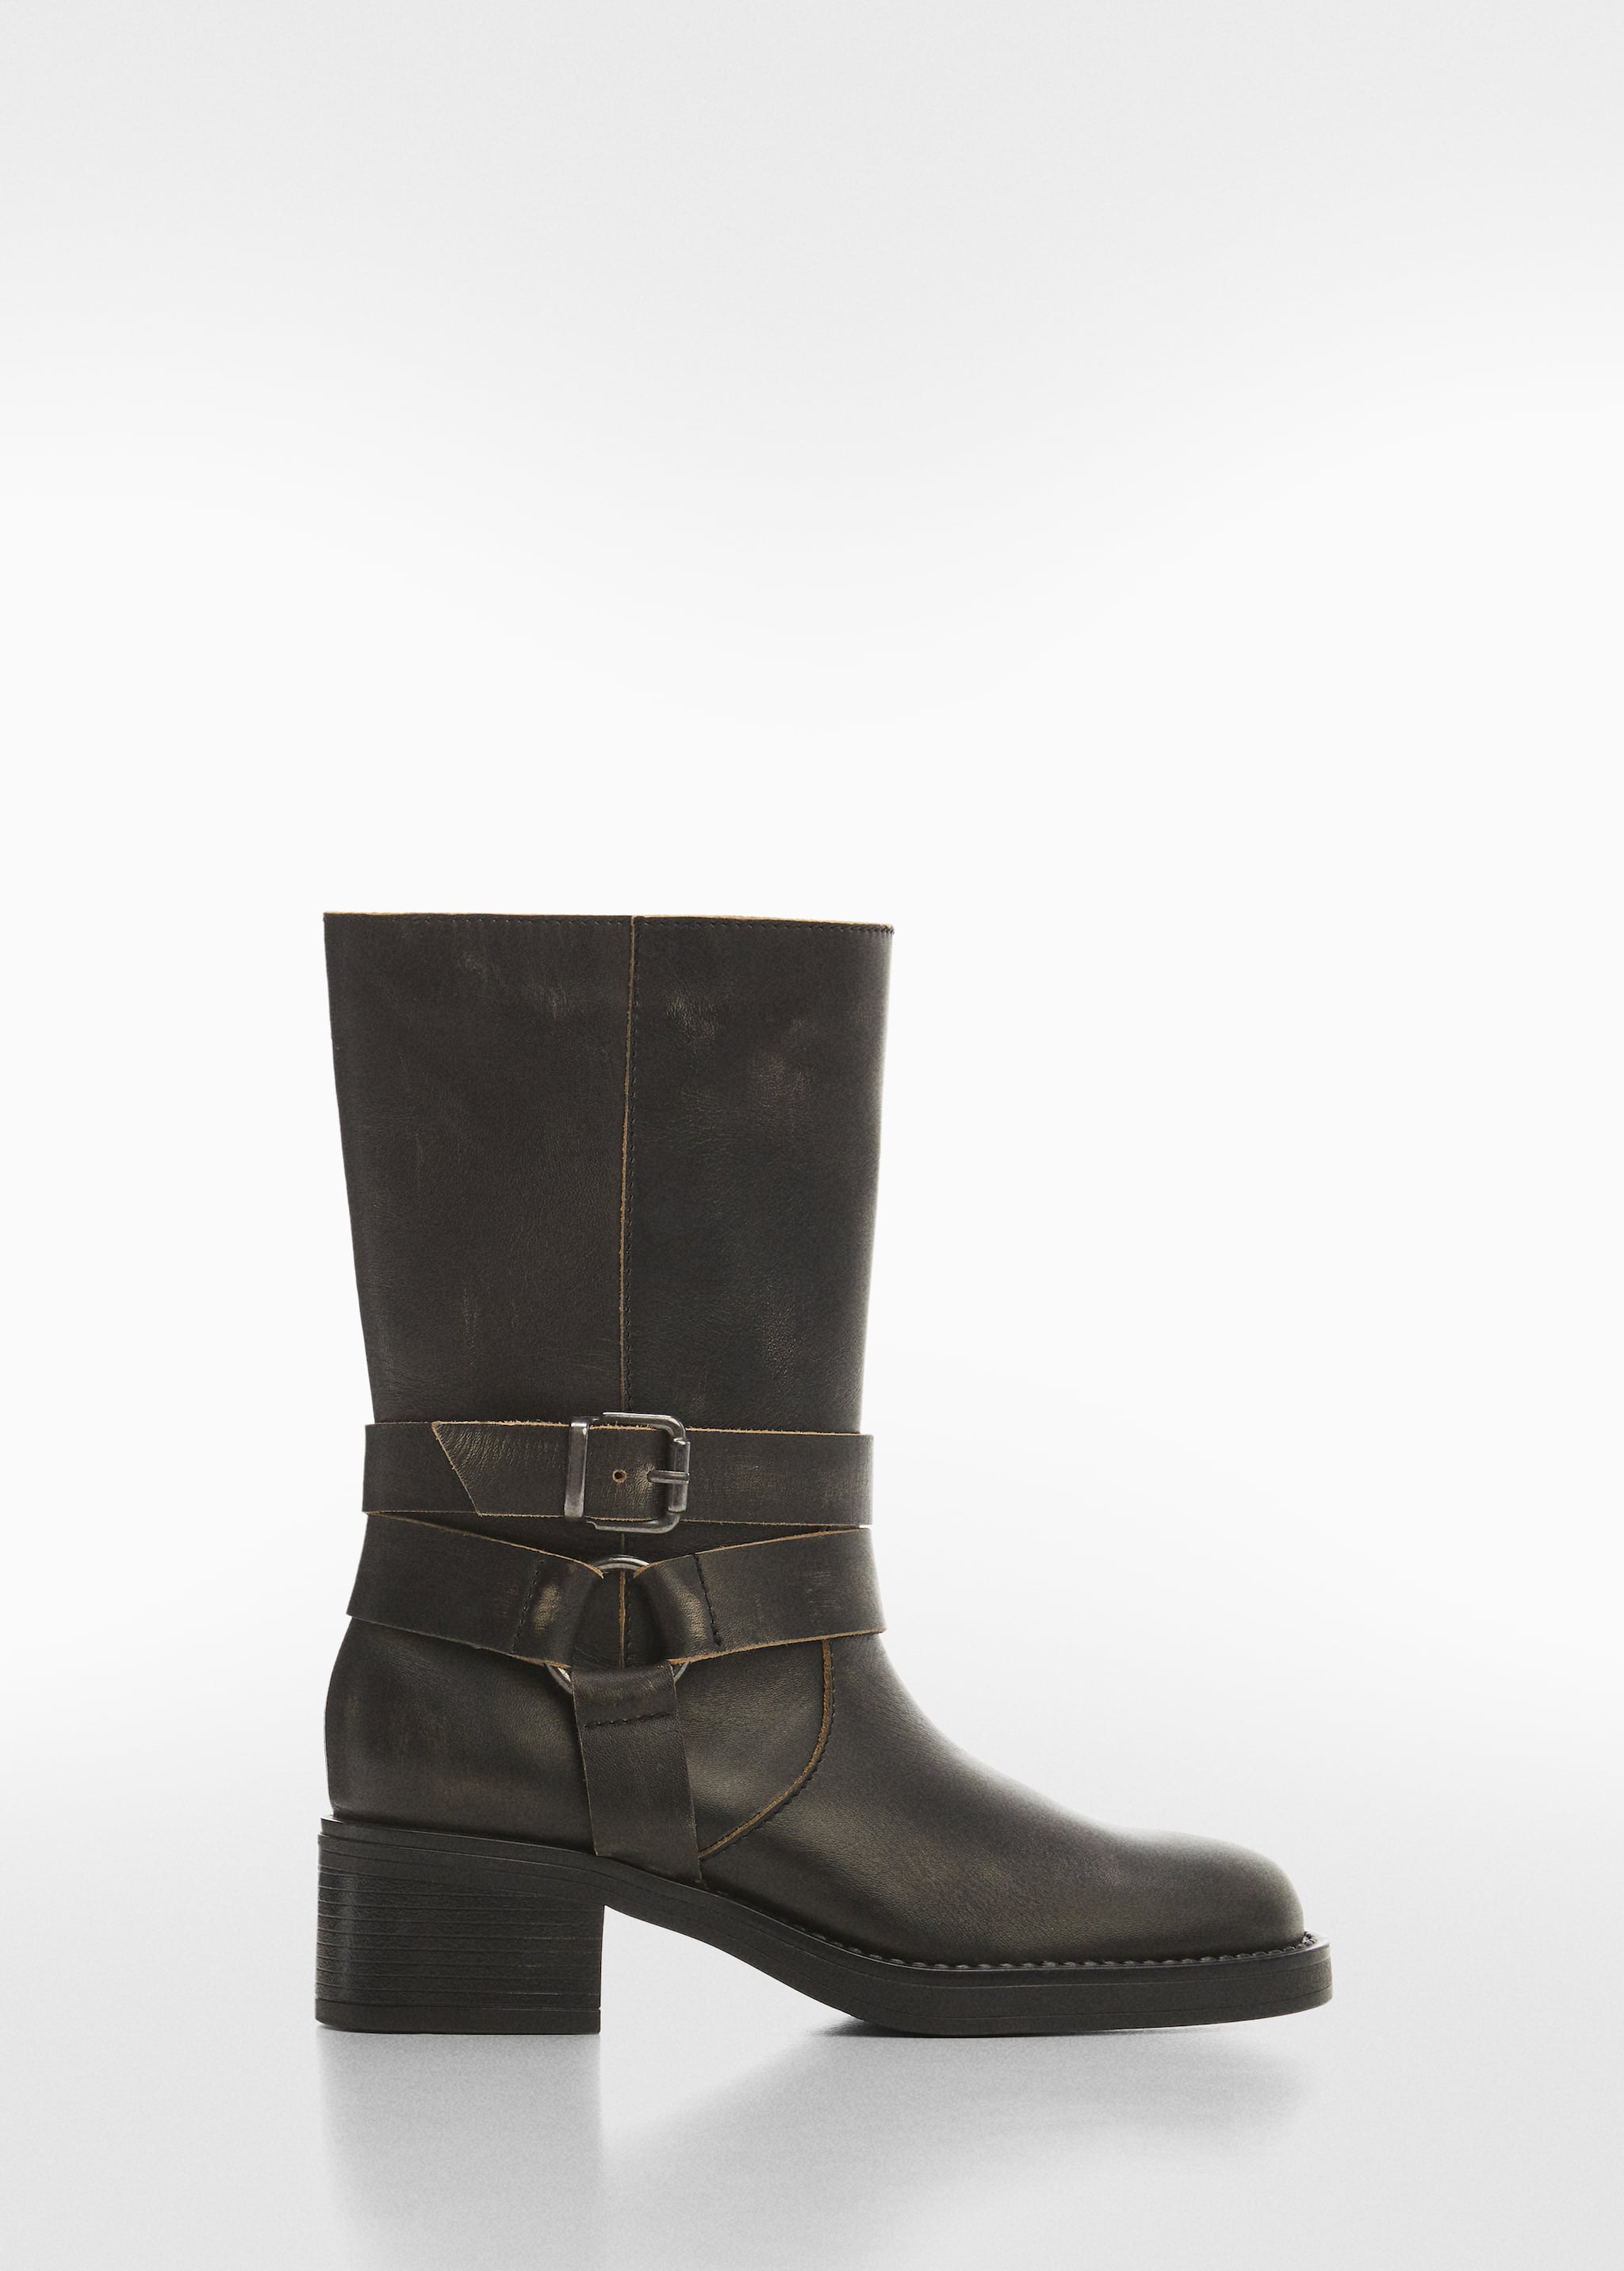 Buckles leather boots - Article without model